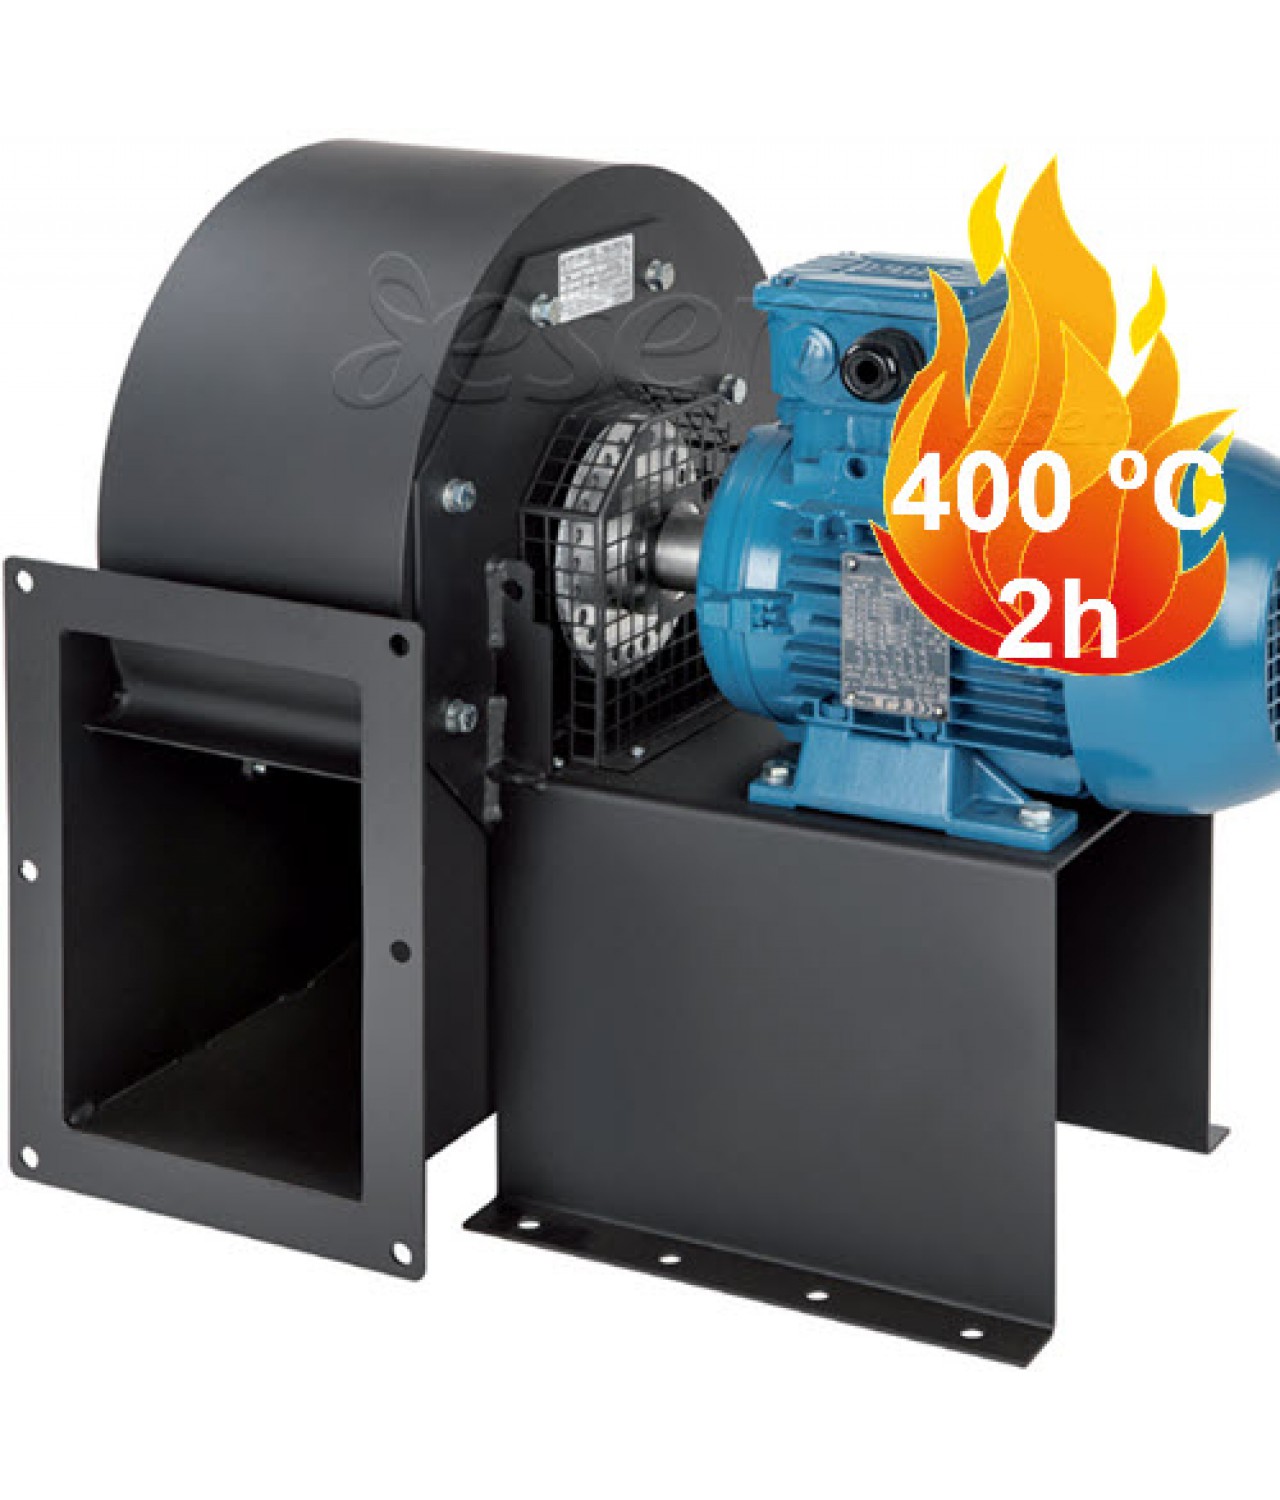 Centrifugal smoke extraction fans CRMT  ≤15930 m³/h